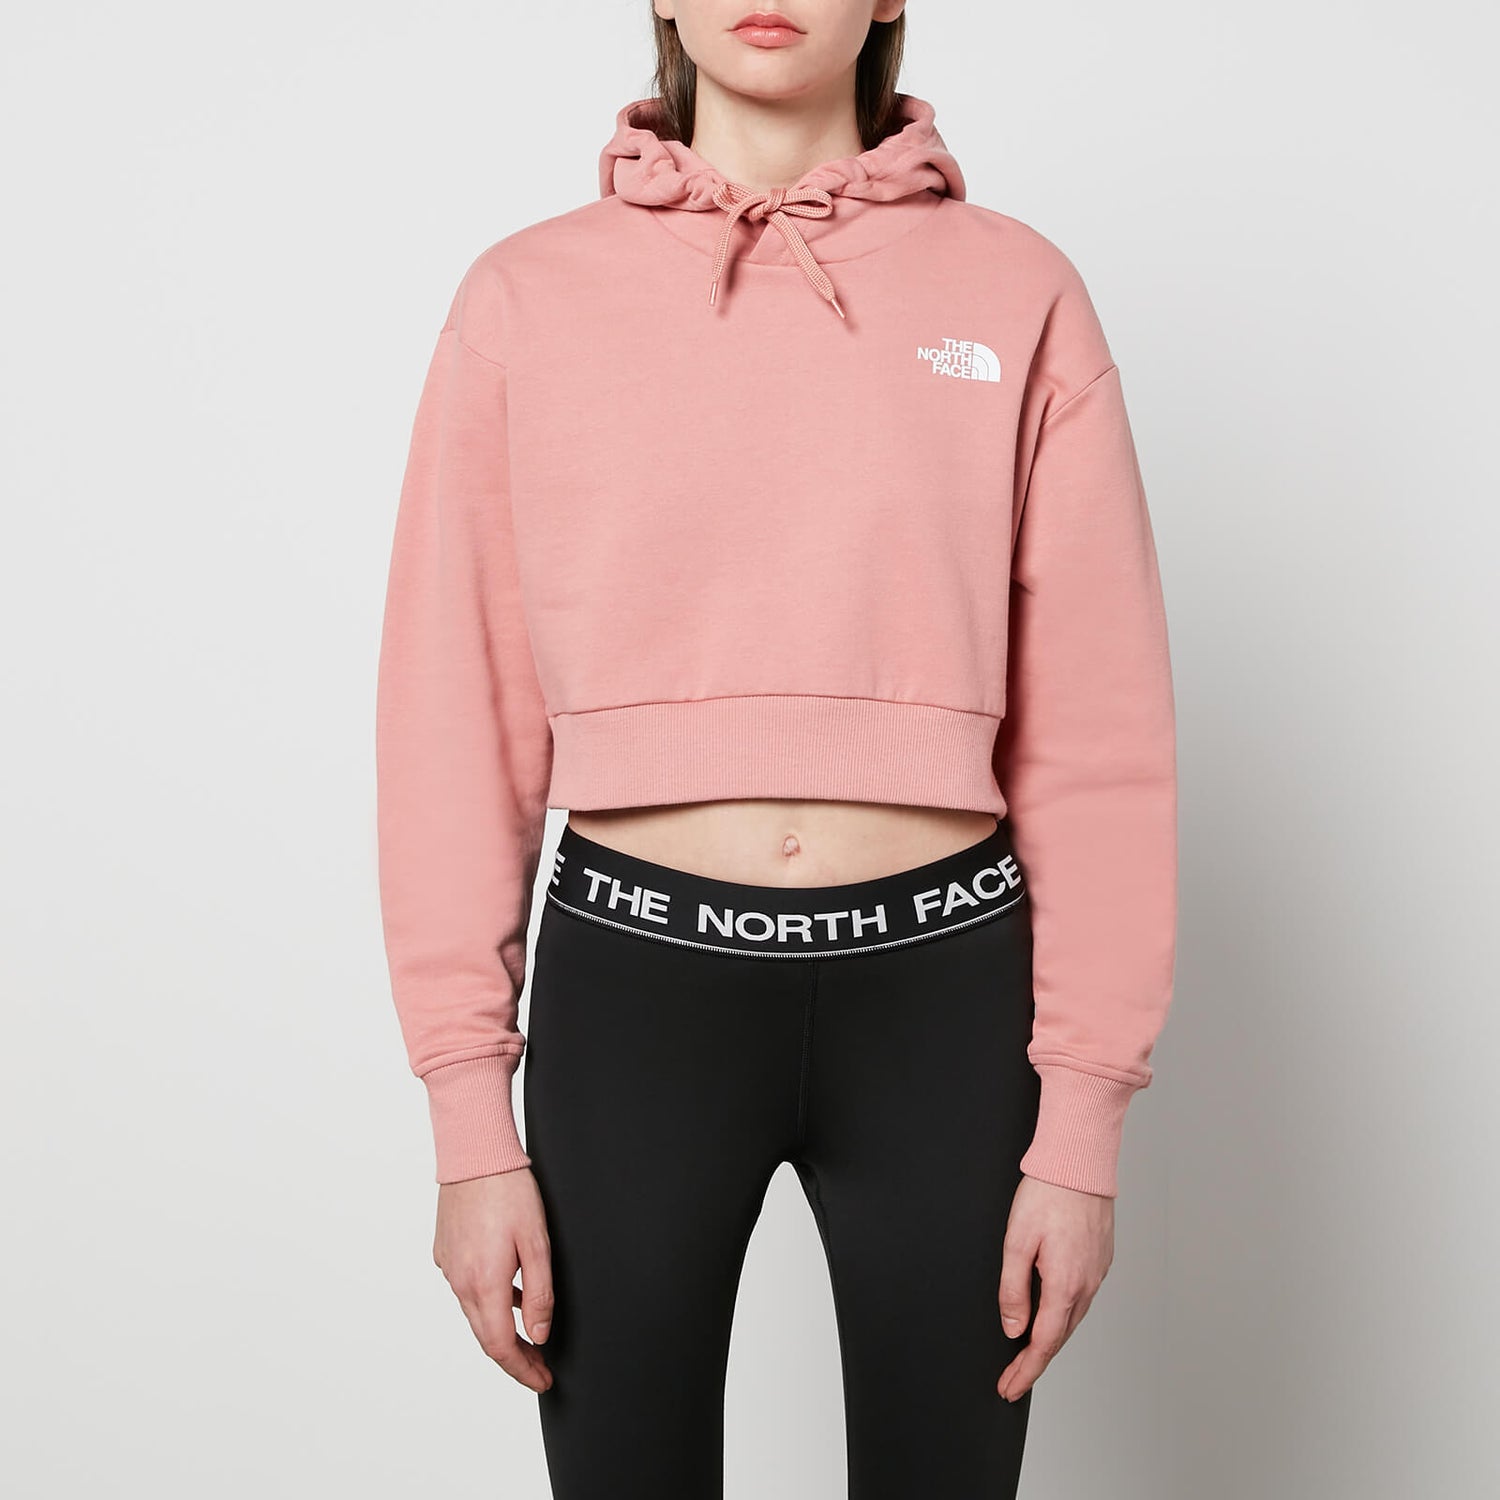 The North Face Women's Trend Crop Hoodie - Rose Dawn